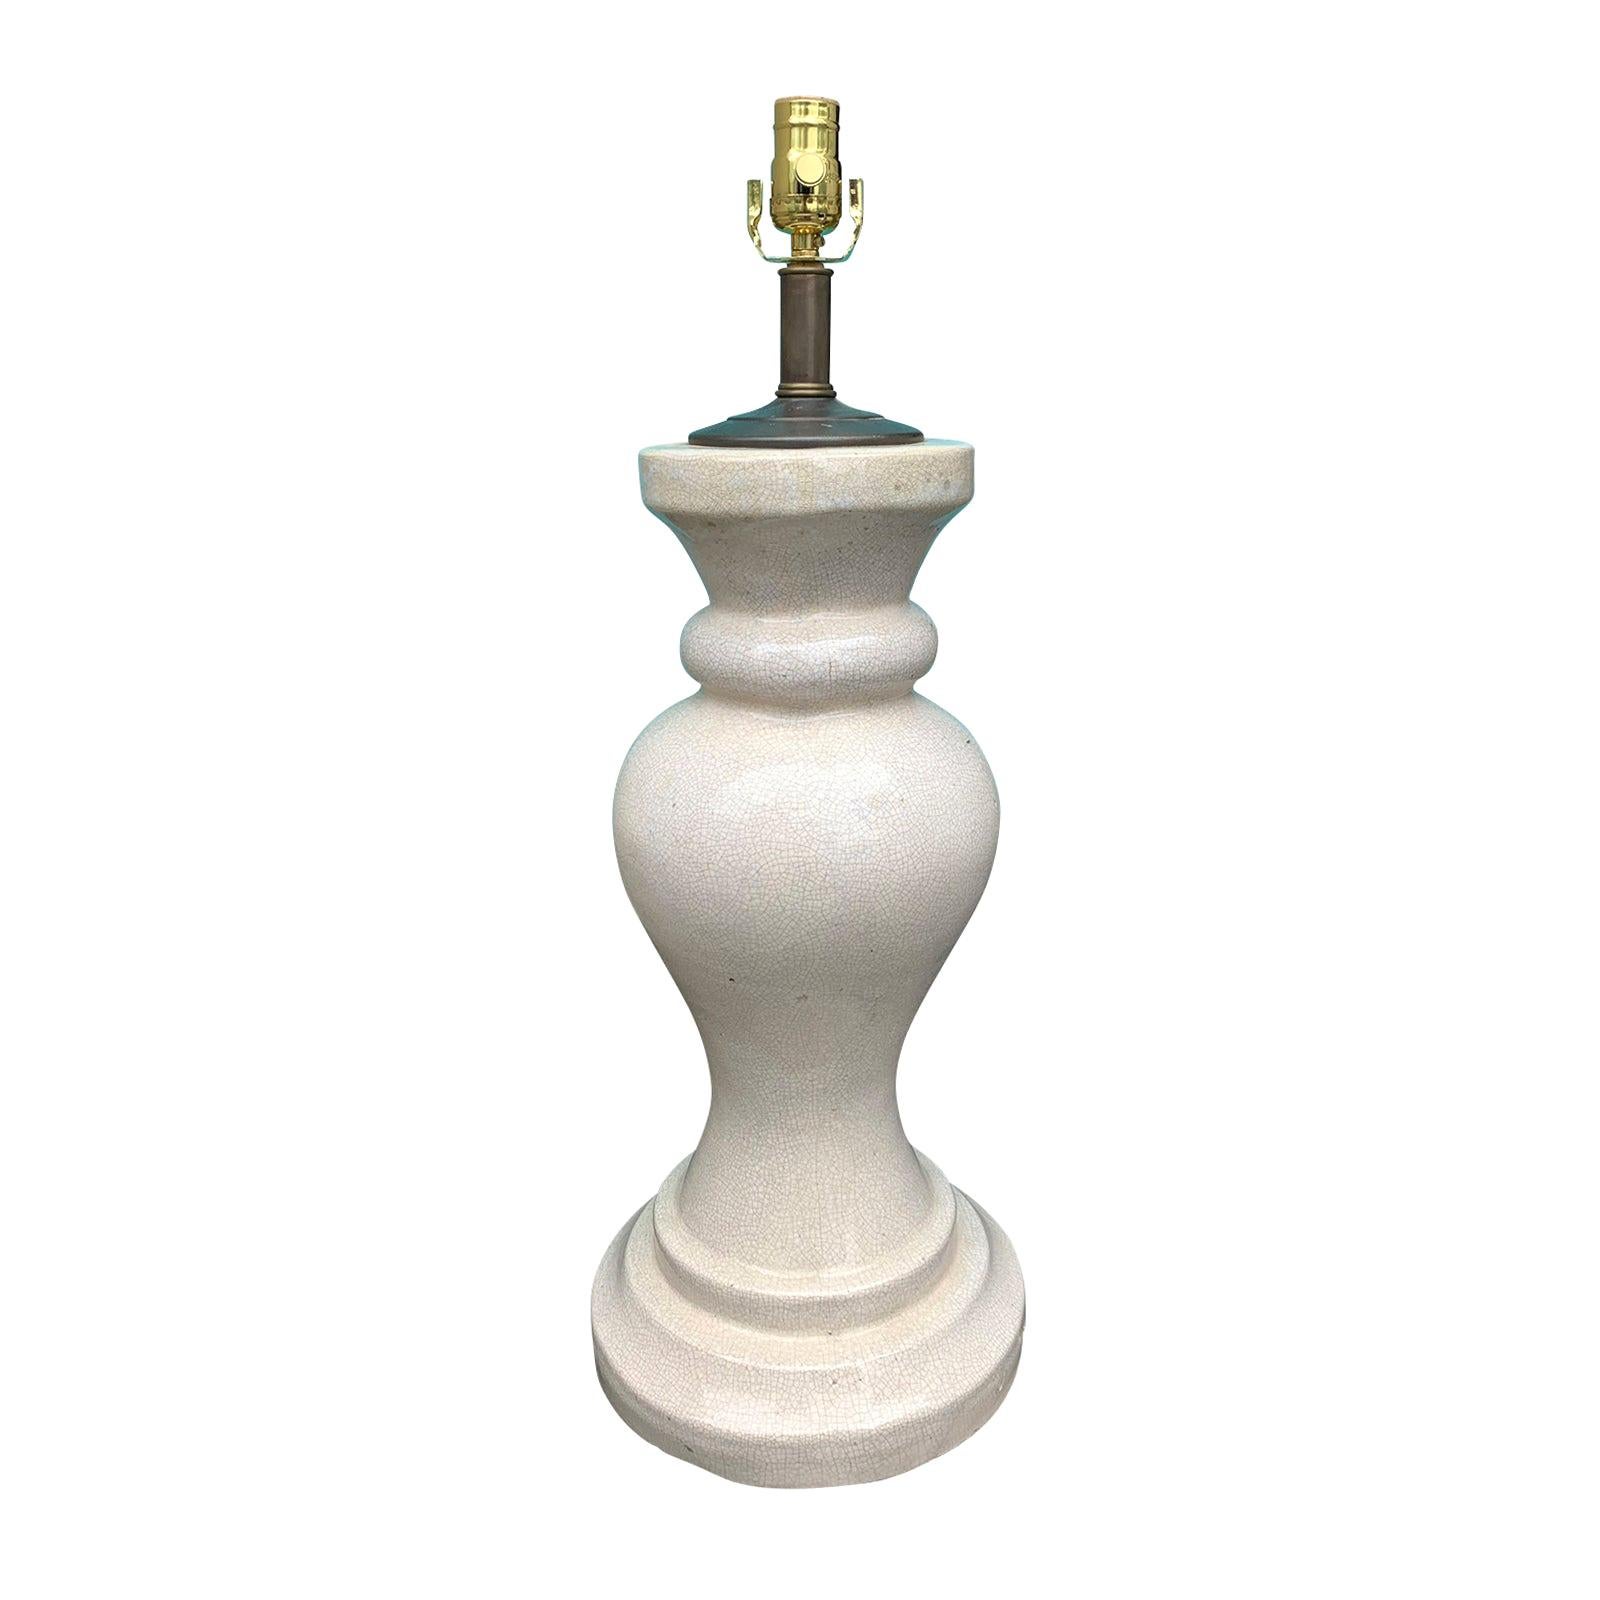 Mid-20th Century White Pottery Lamp with Crackle Finish For Sale